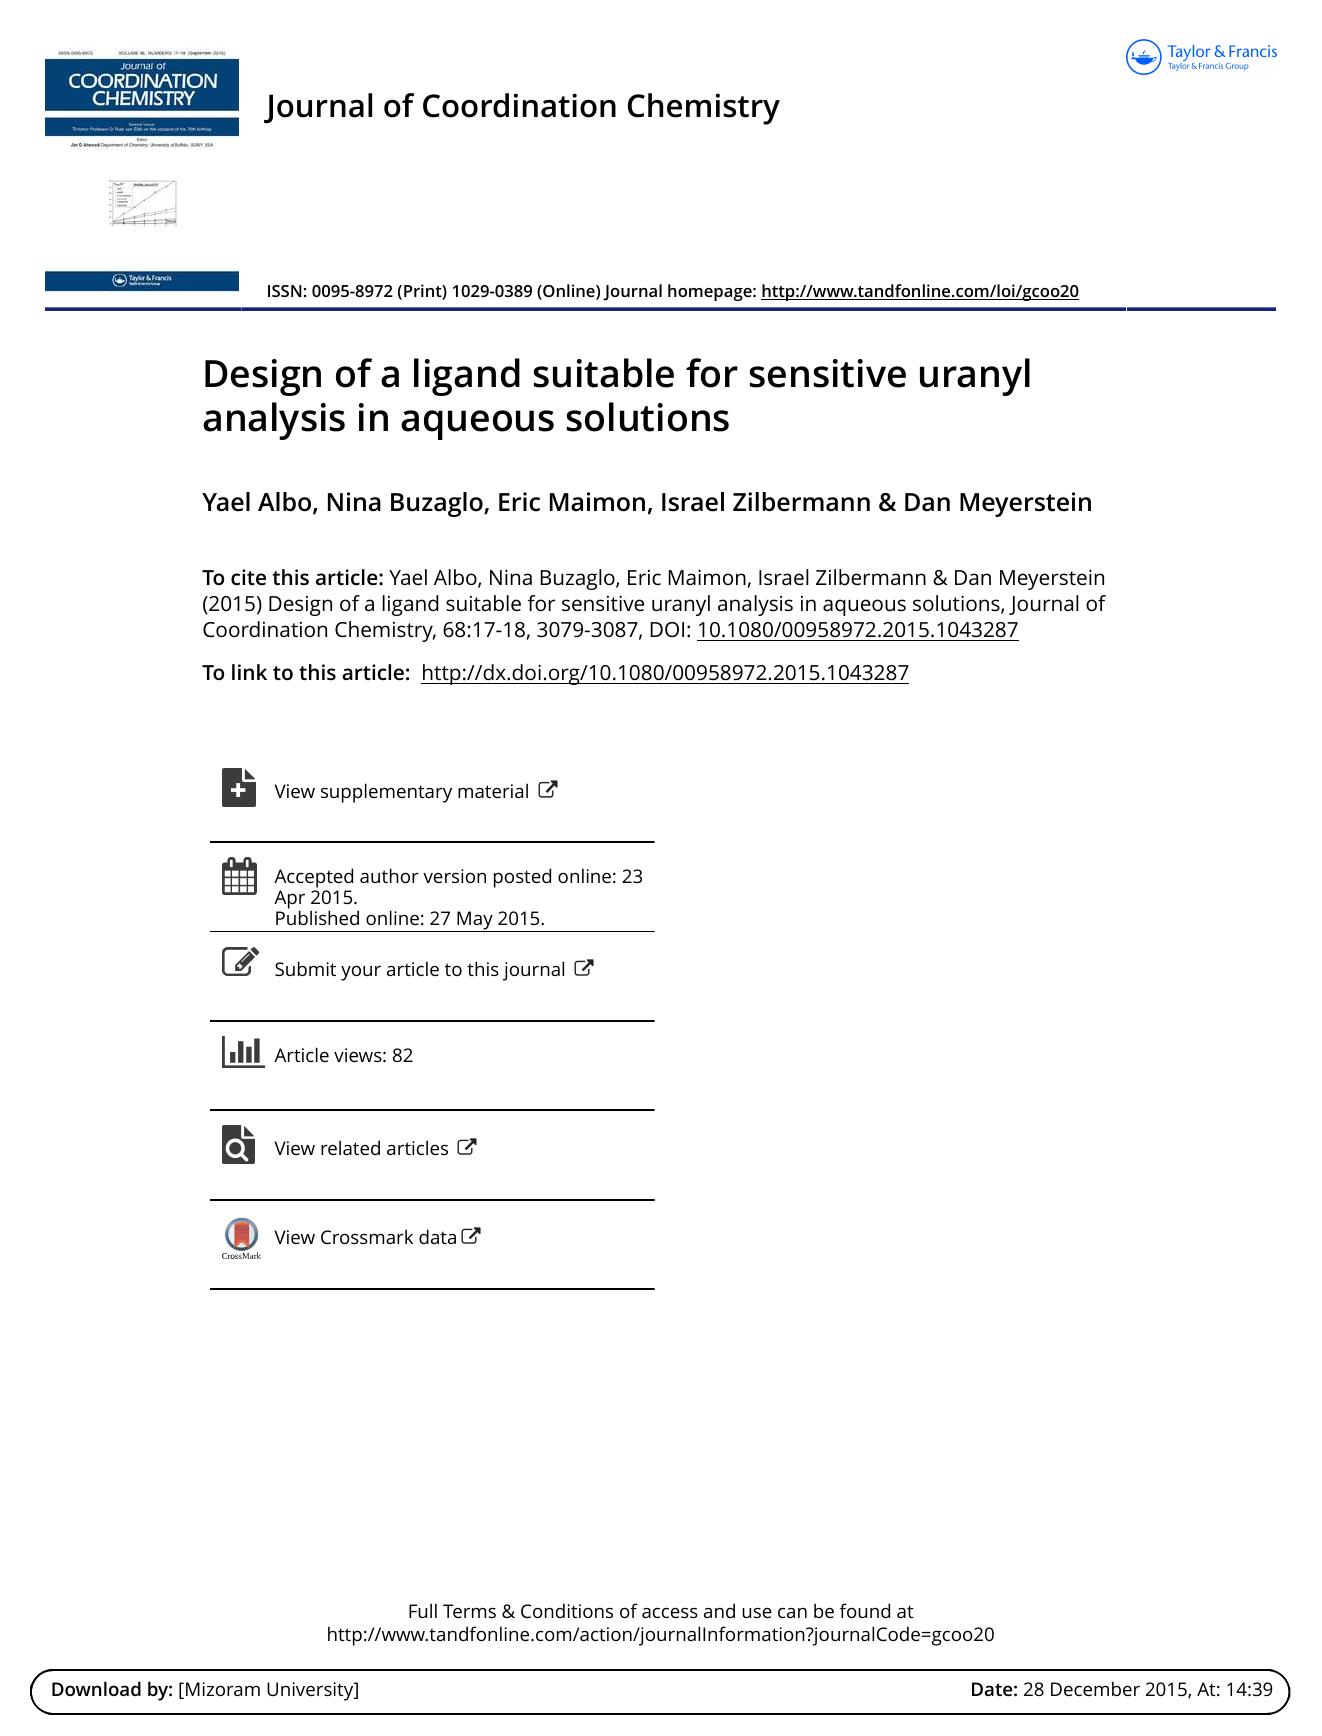 Design of a ligand suitable for sensitive uranyl analysis in aqueous solutions by Yael Albo